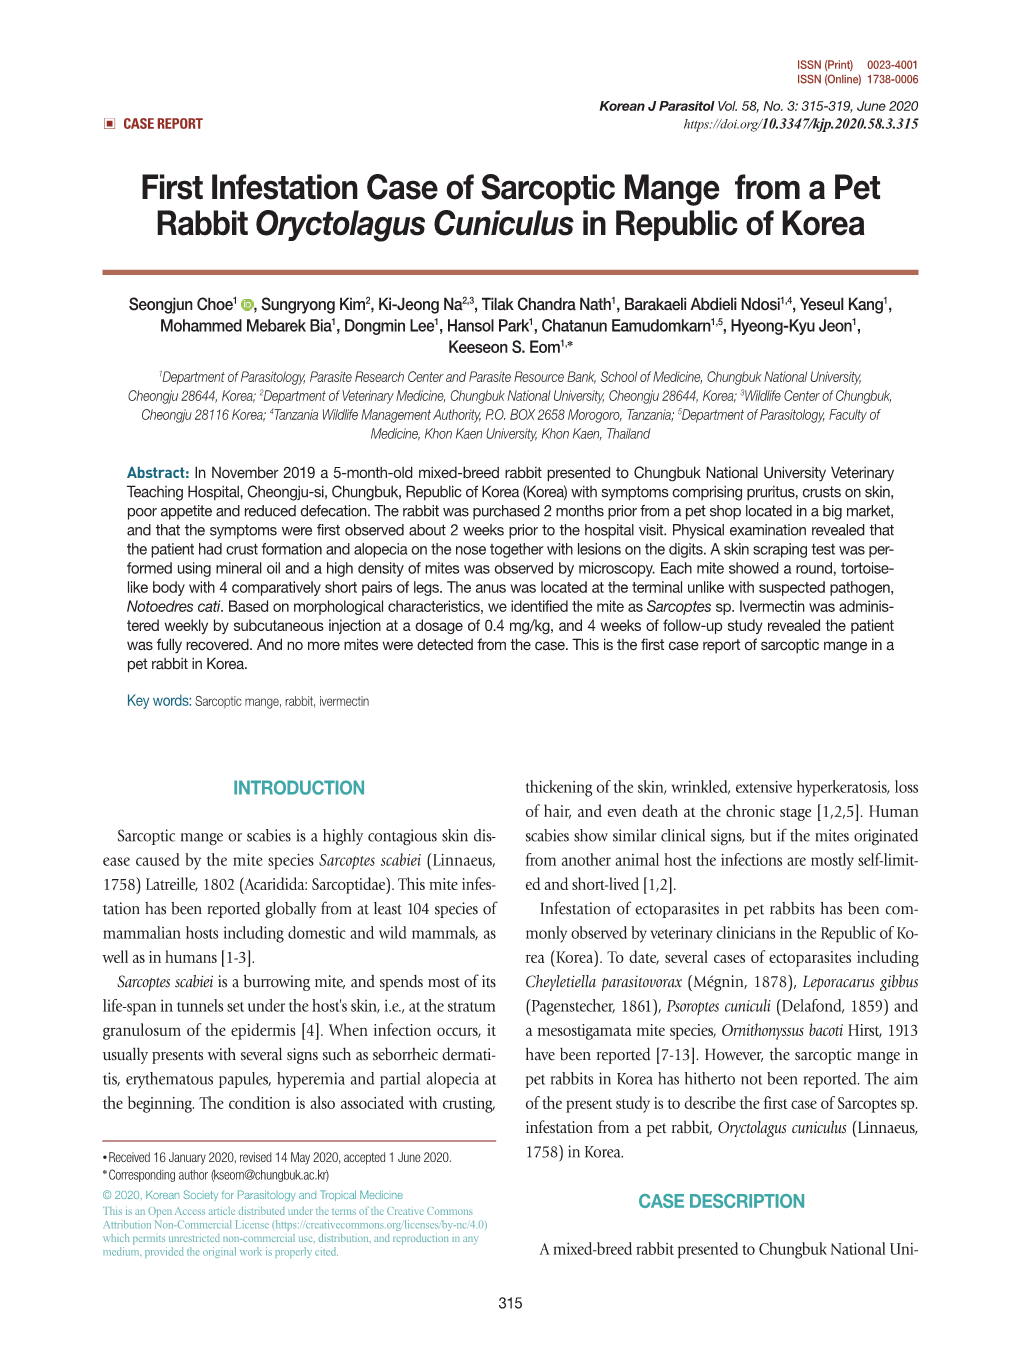 First Infestation Case of Sarcoptic Mange from a Pet Rabbit Oryctolagus Cuniculus in Republic of Korea